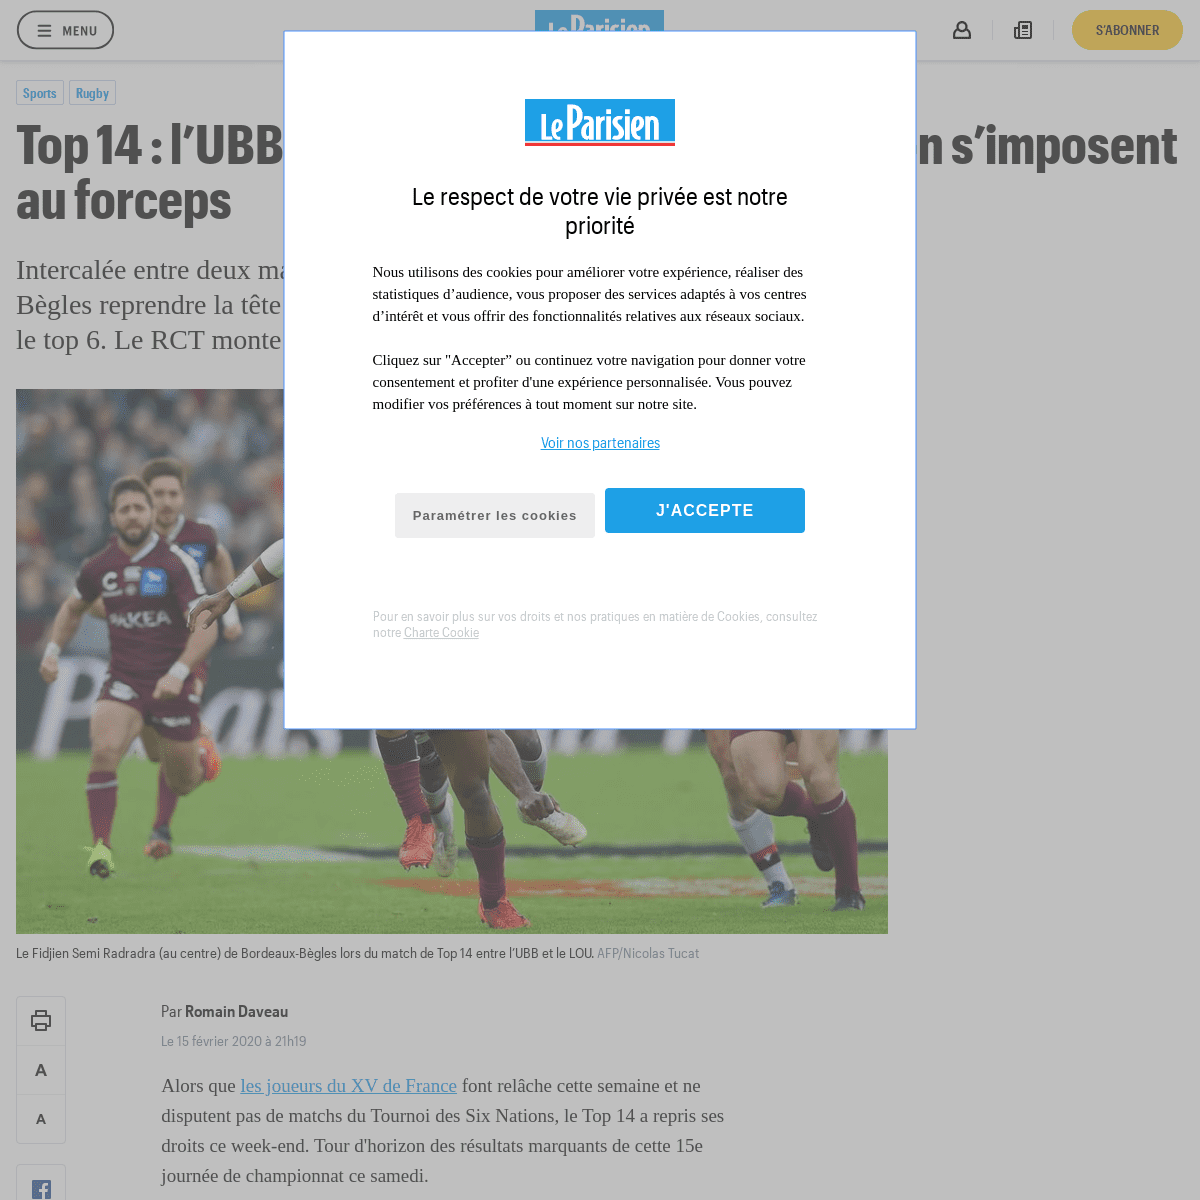 A complete backup of www.leparisien.fr/sports/rugby/top-14-l-ubb-taille-patron-clermont-et-toulon-s-imposent-au-forceps-15-02-20